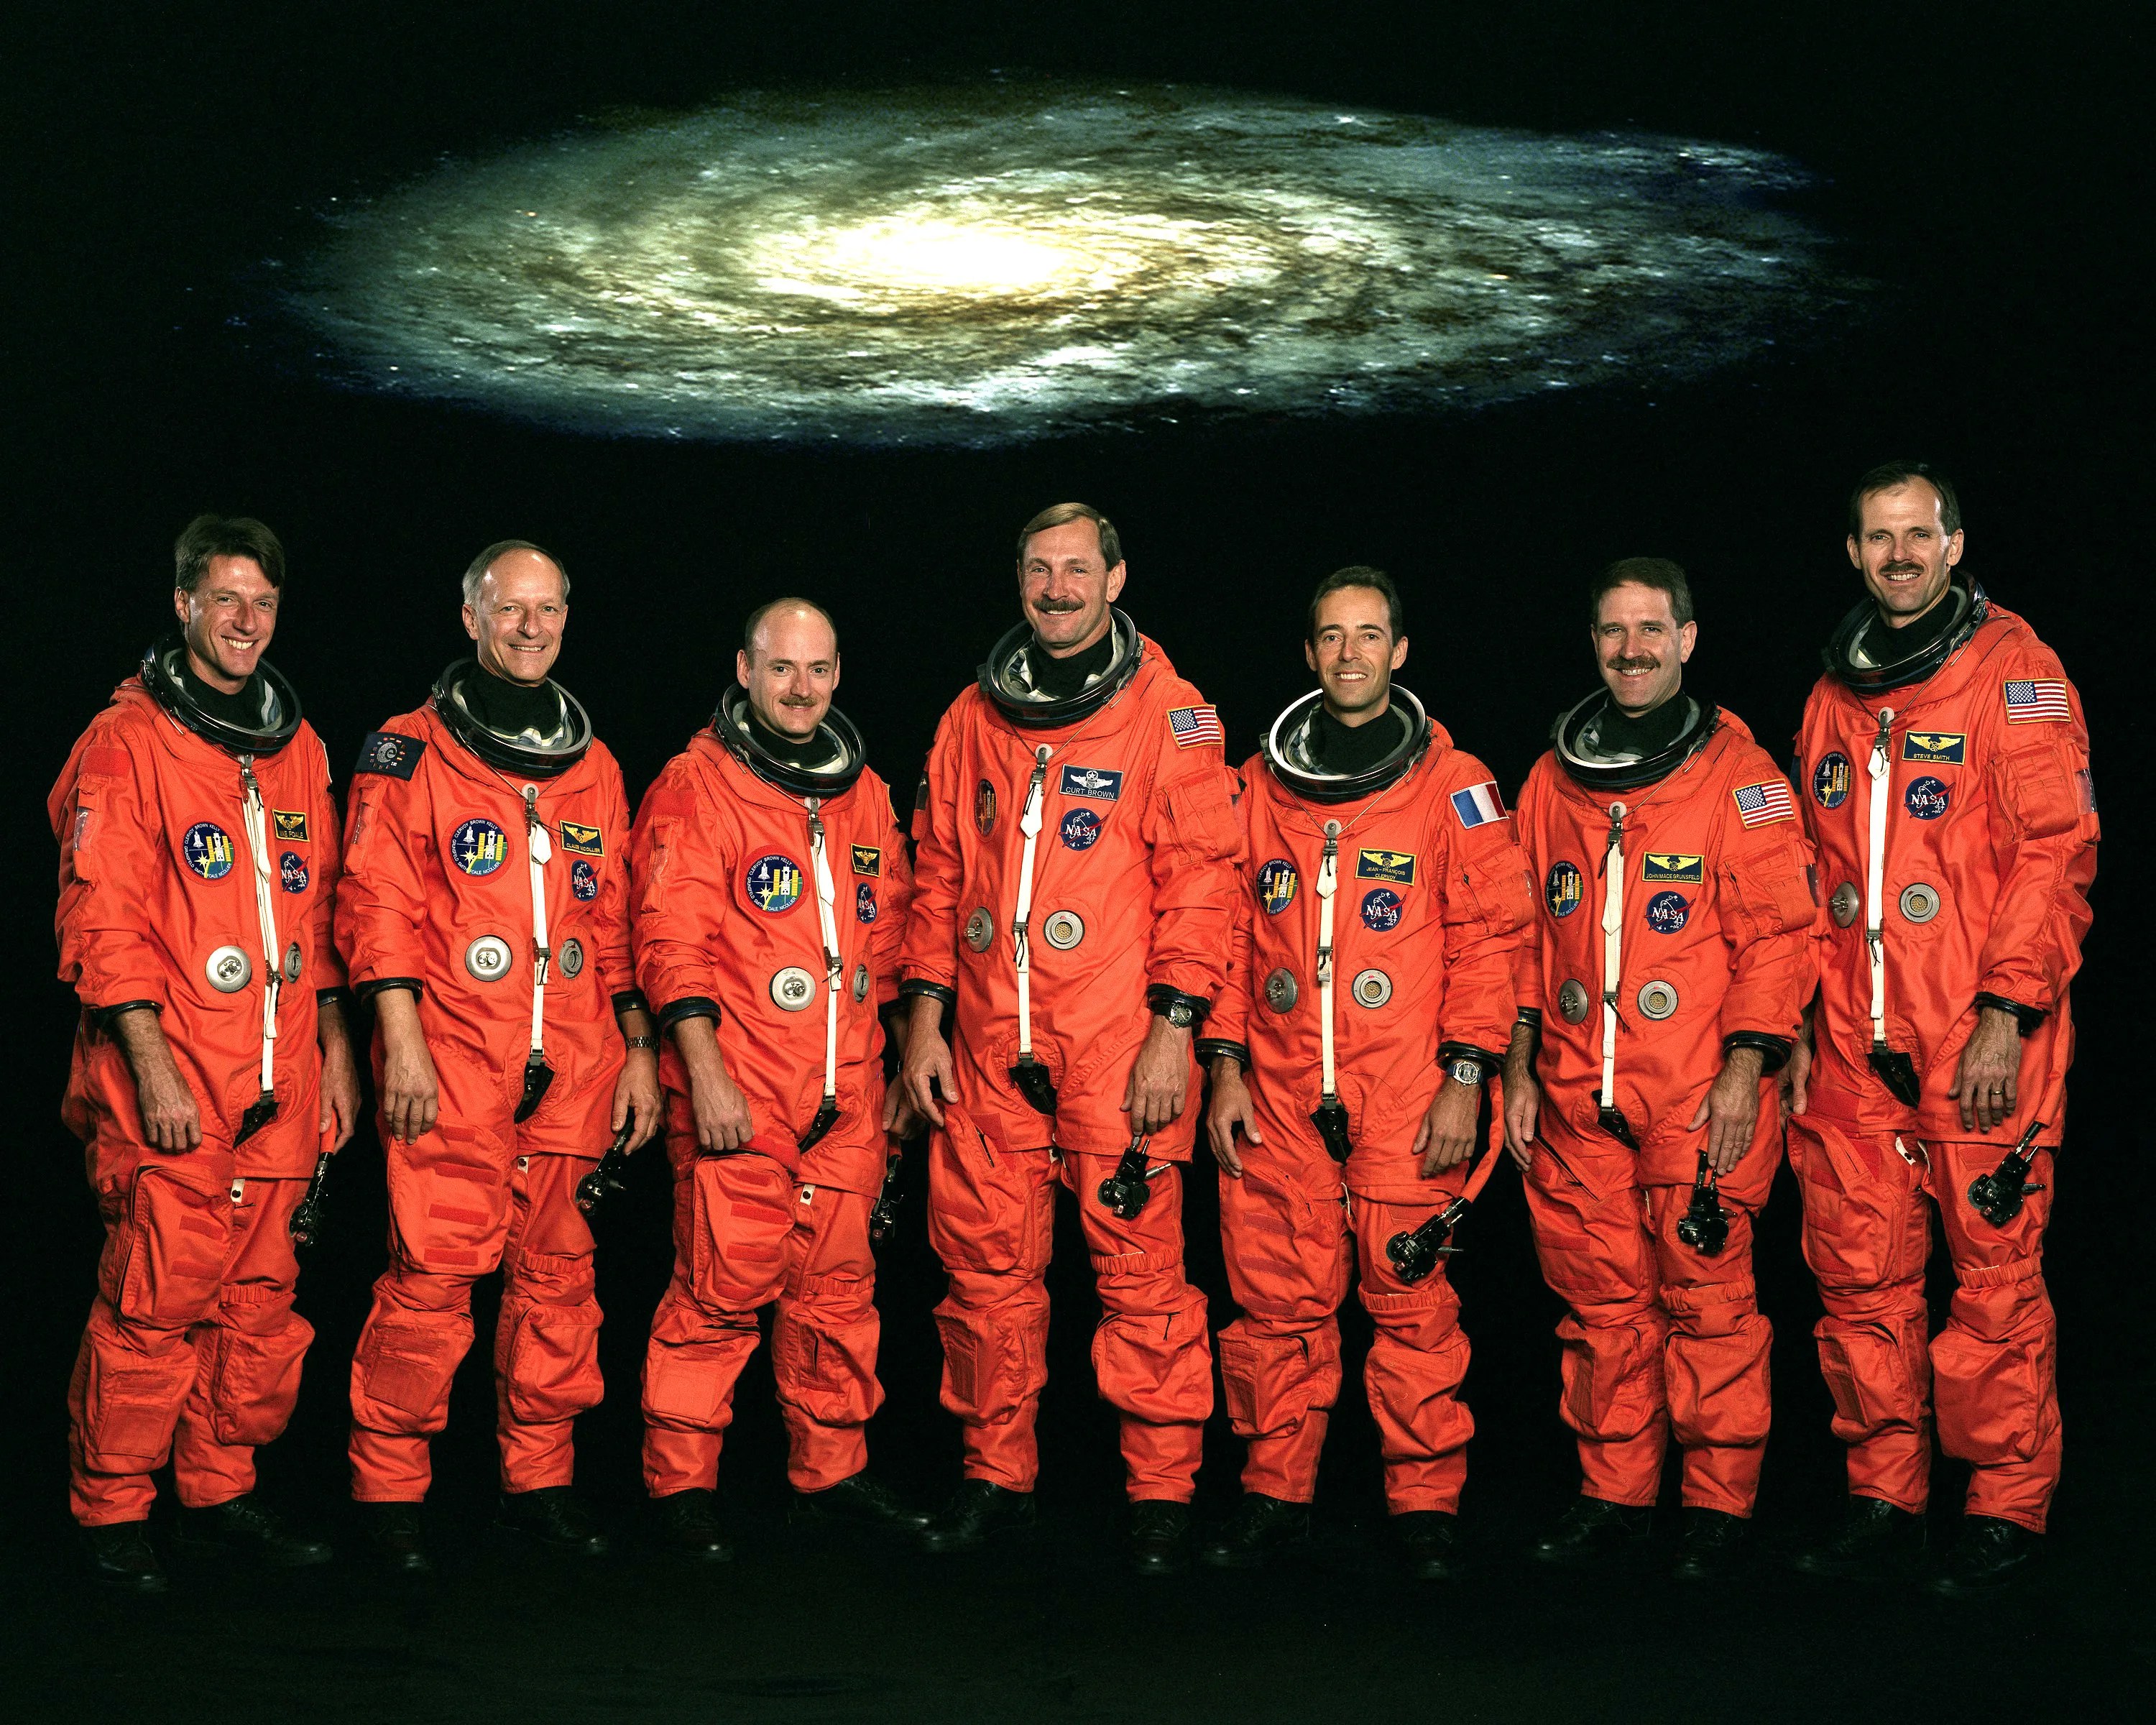 Seven astronauts in orange space suits stand in a line. A spiral galaxy hovers above their heads in the backdrop.